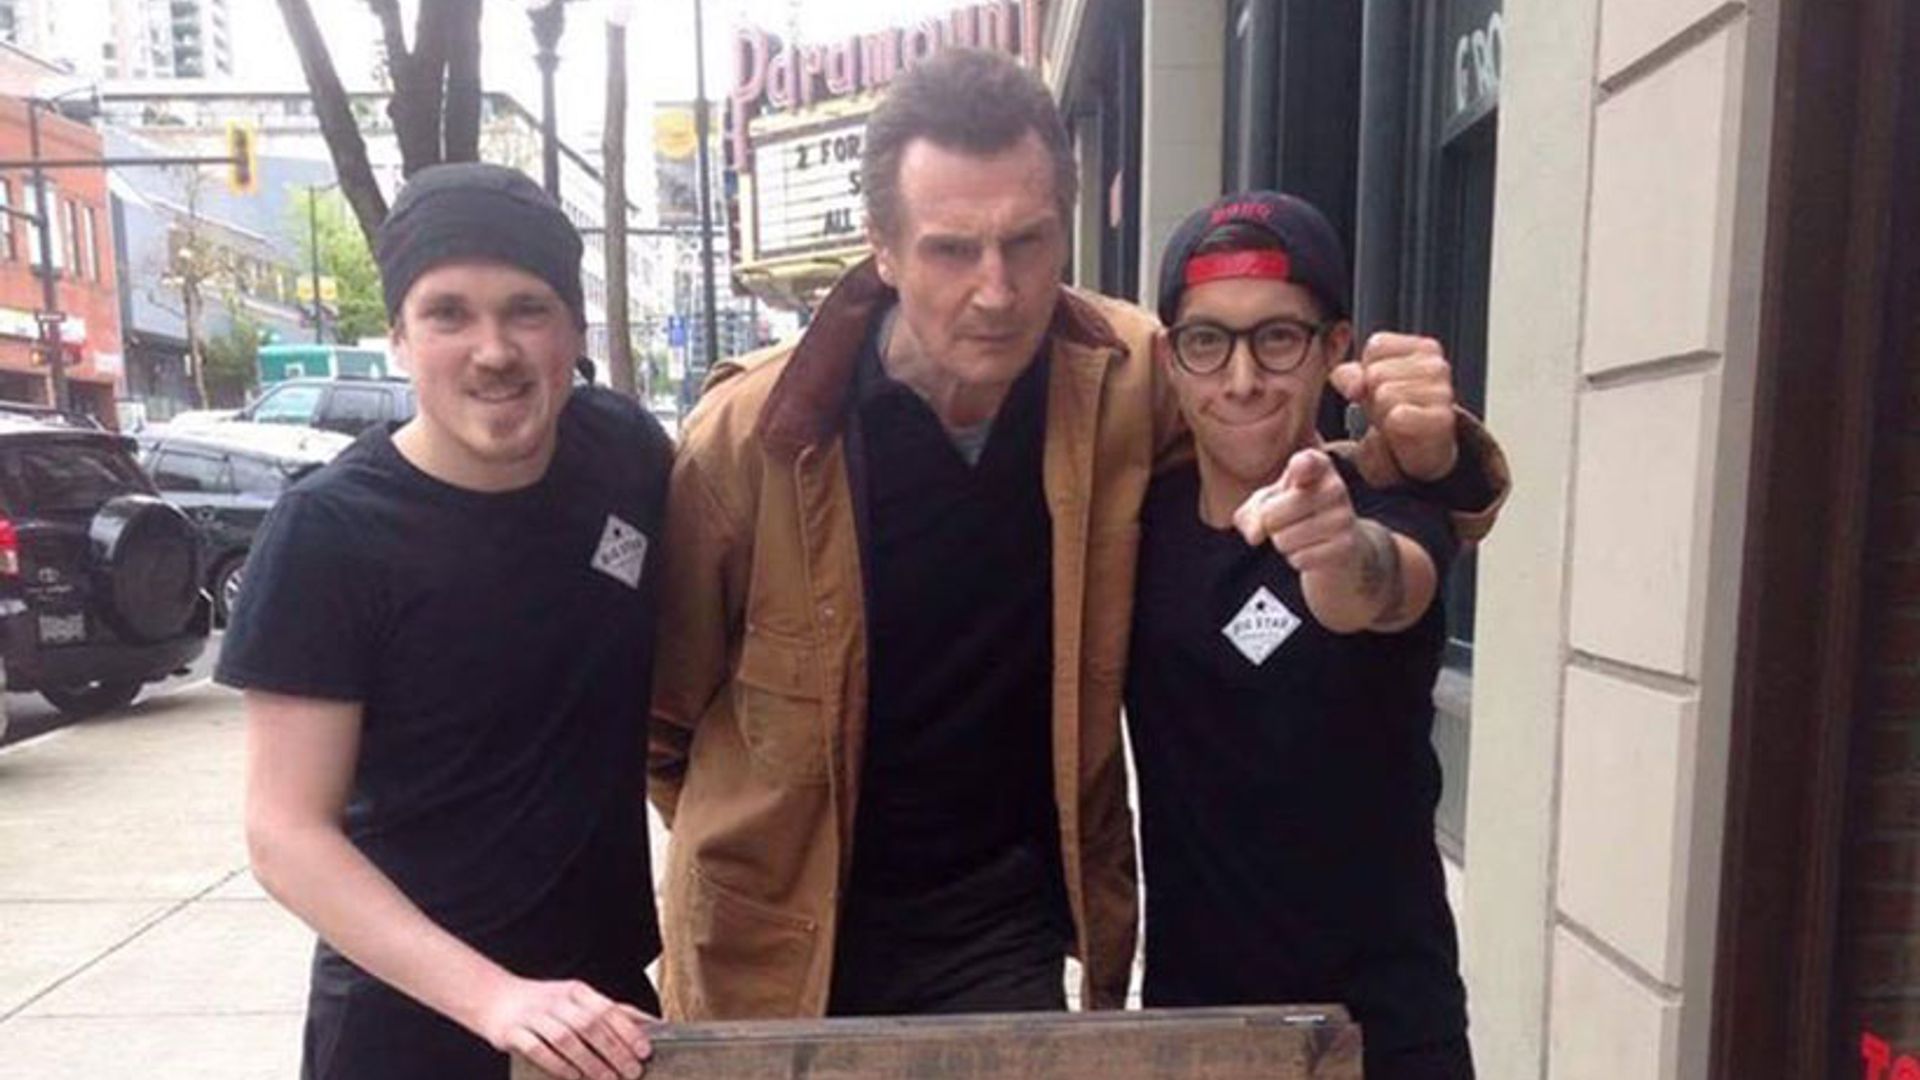 Liam Neeson shows up at restaurant after they promise him free sandwich